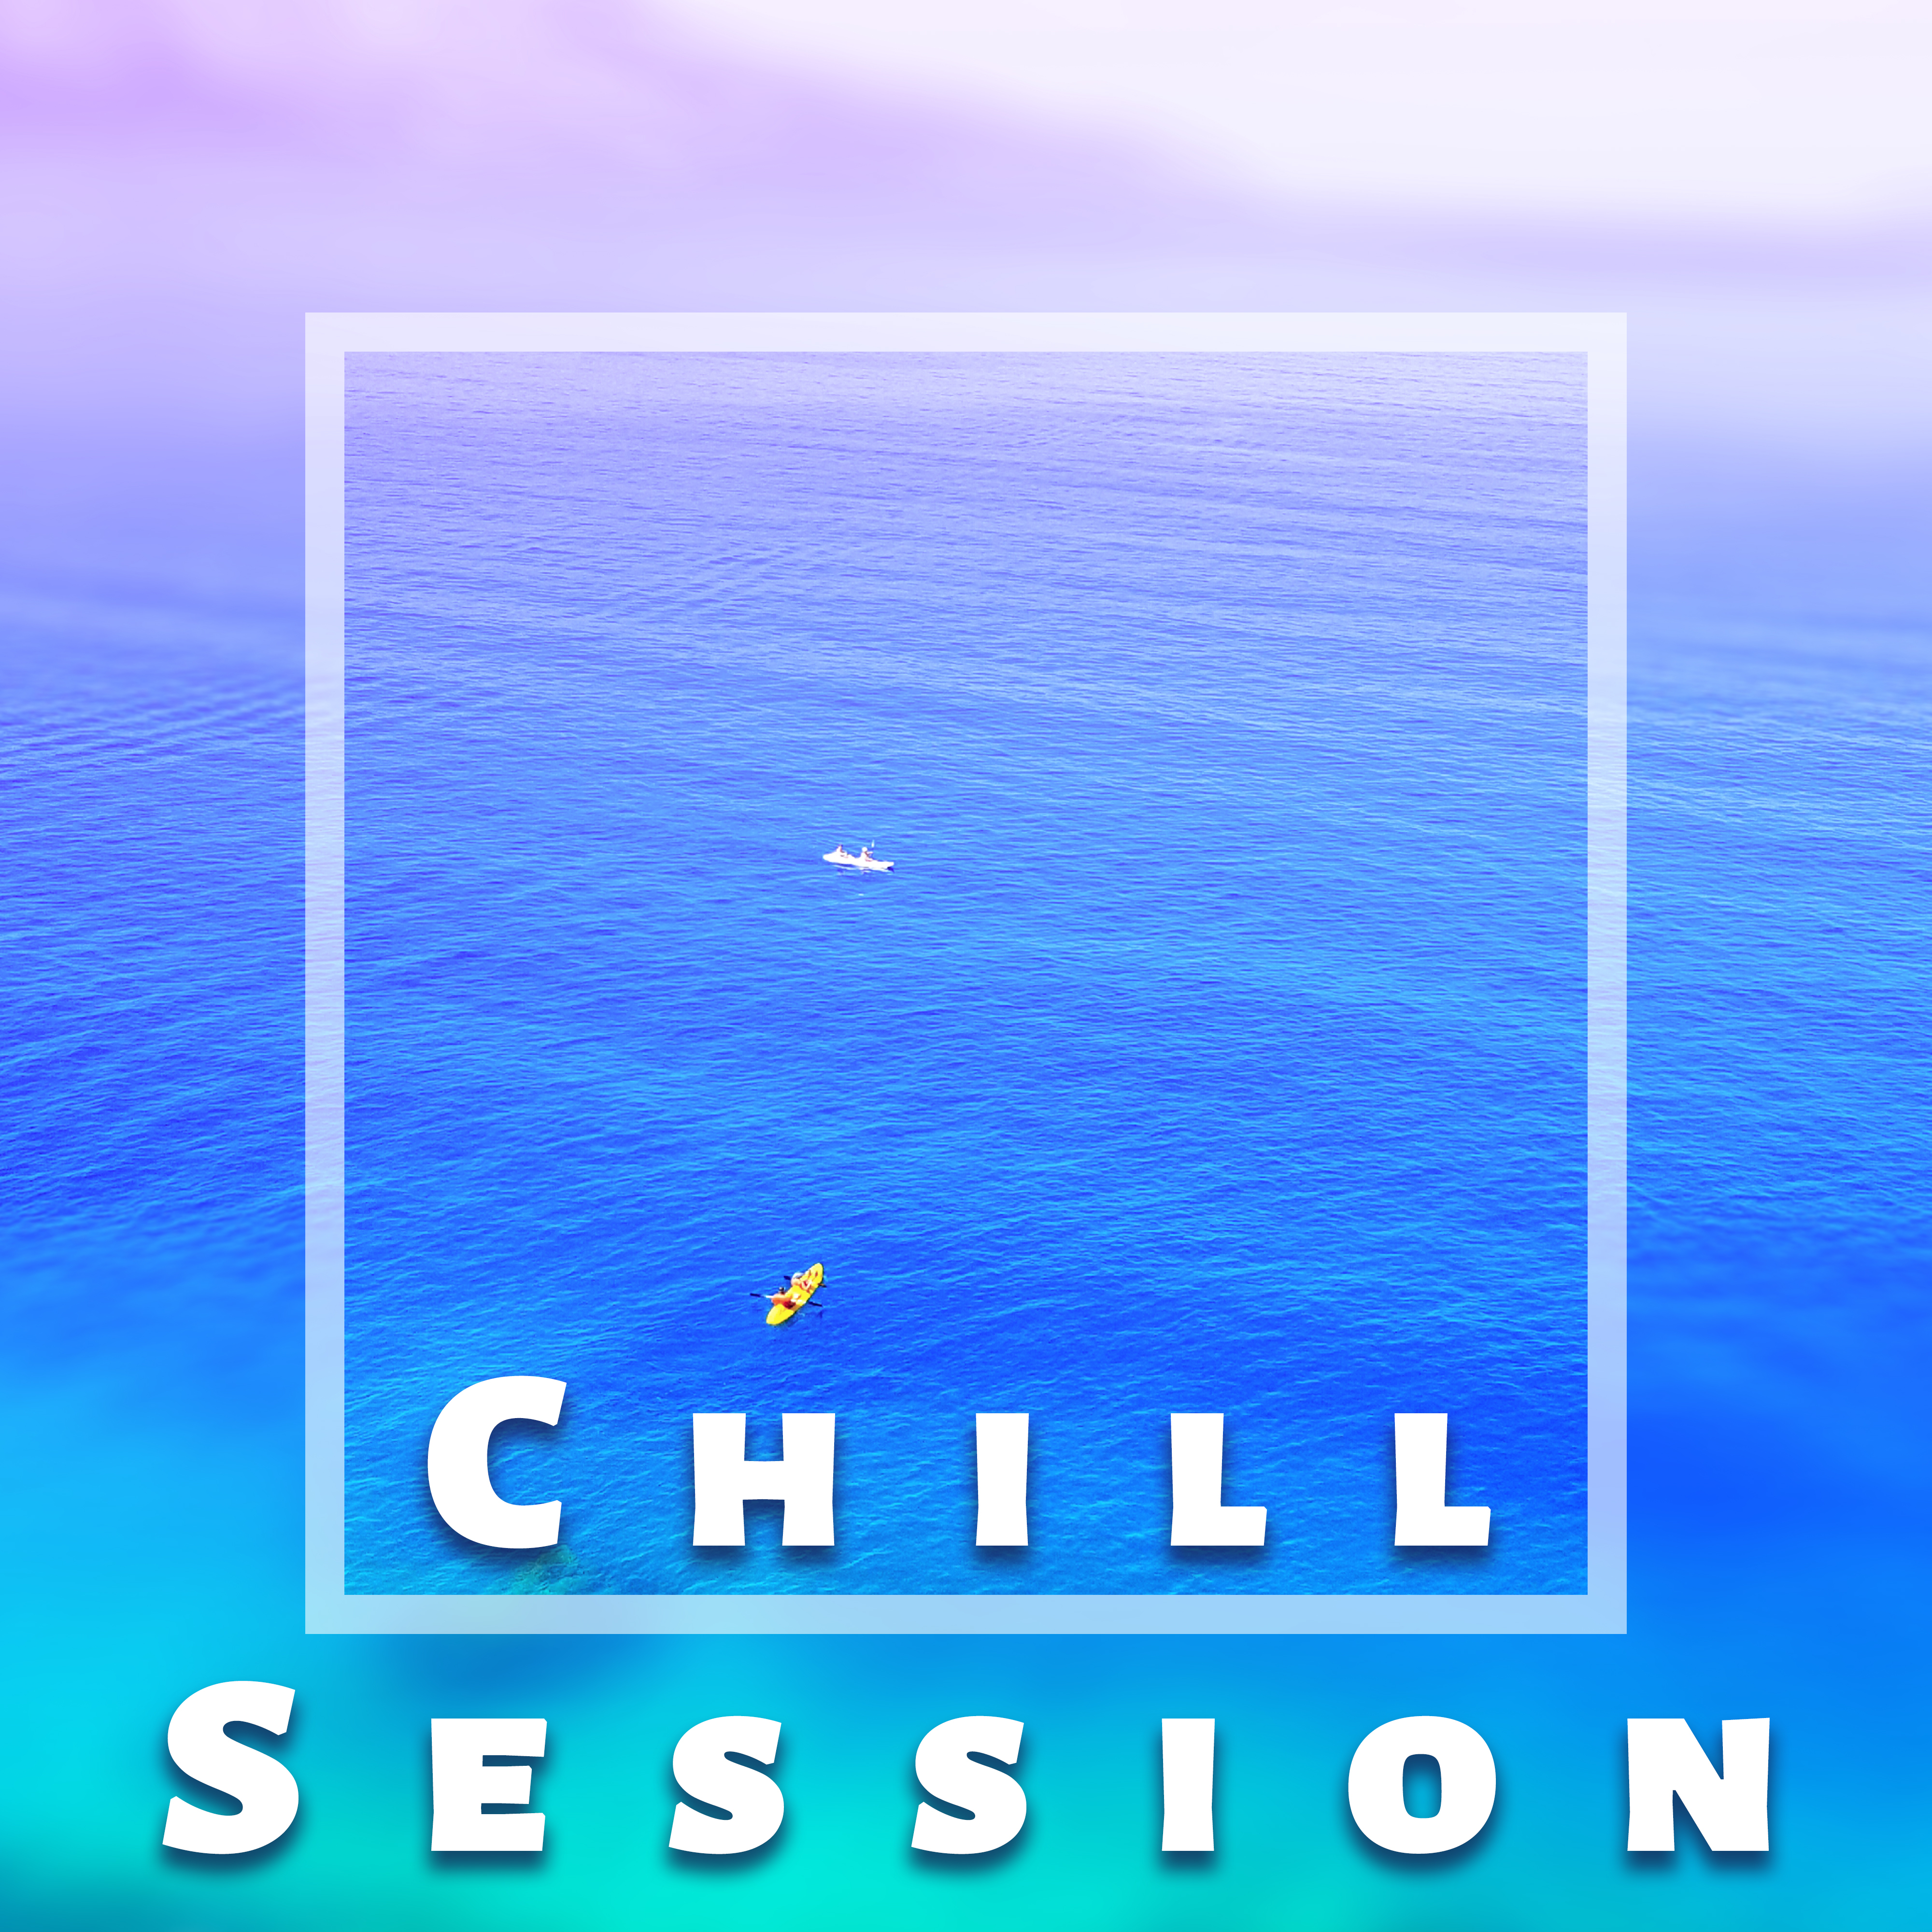 Chill Session  Beach Lounge, Chill Out 2017, Relax, Summertime, Beach Music, Chill Paradise, Tropical Rest